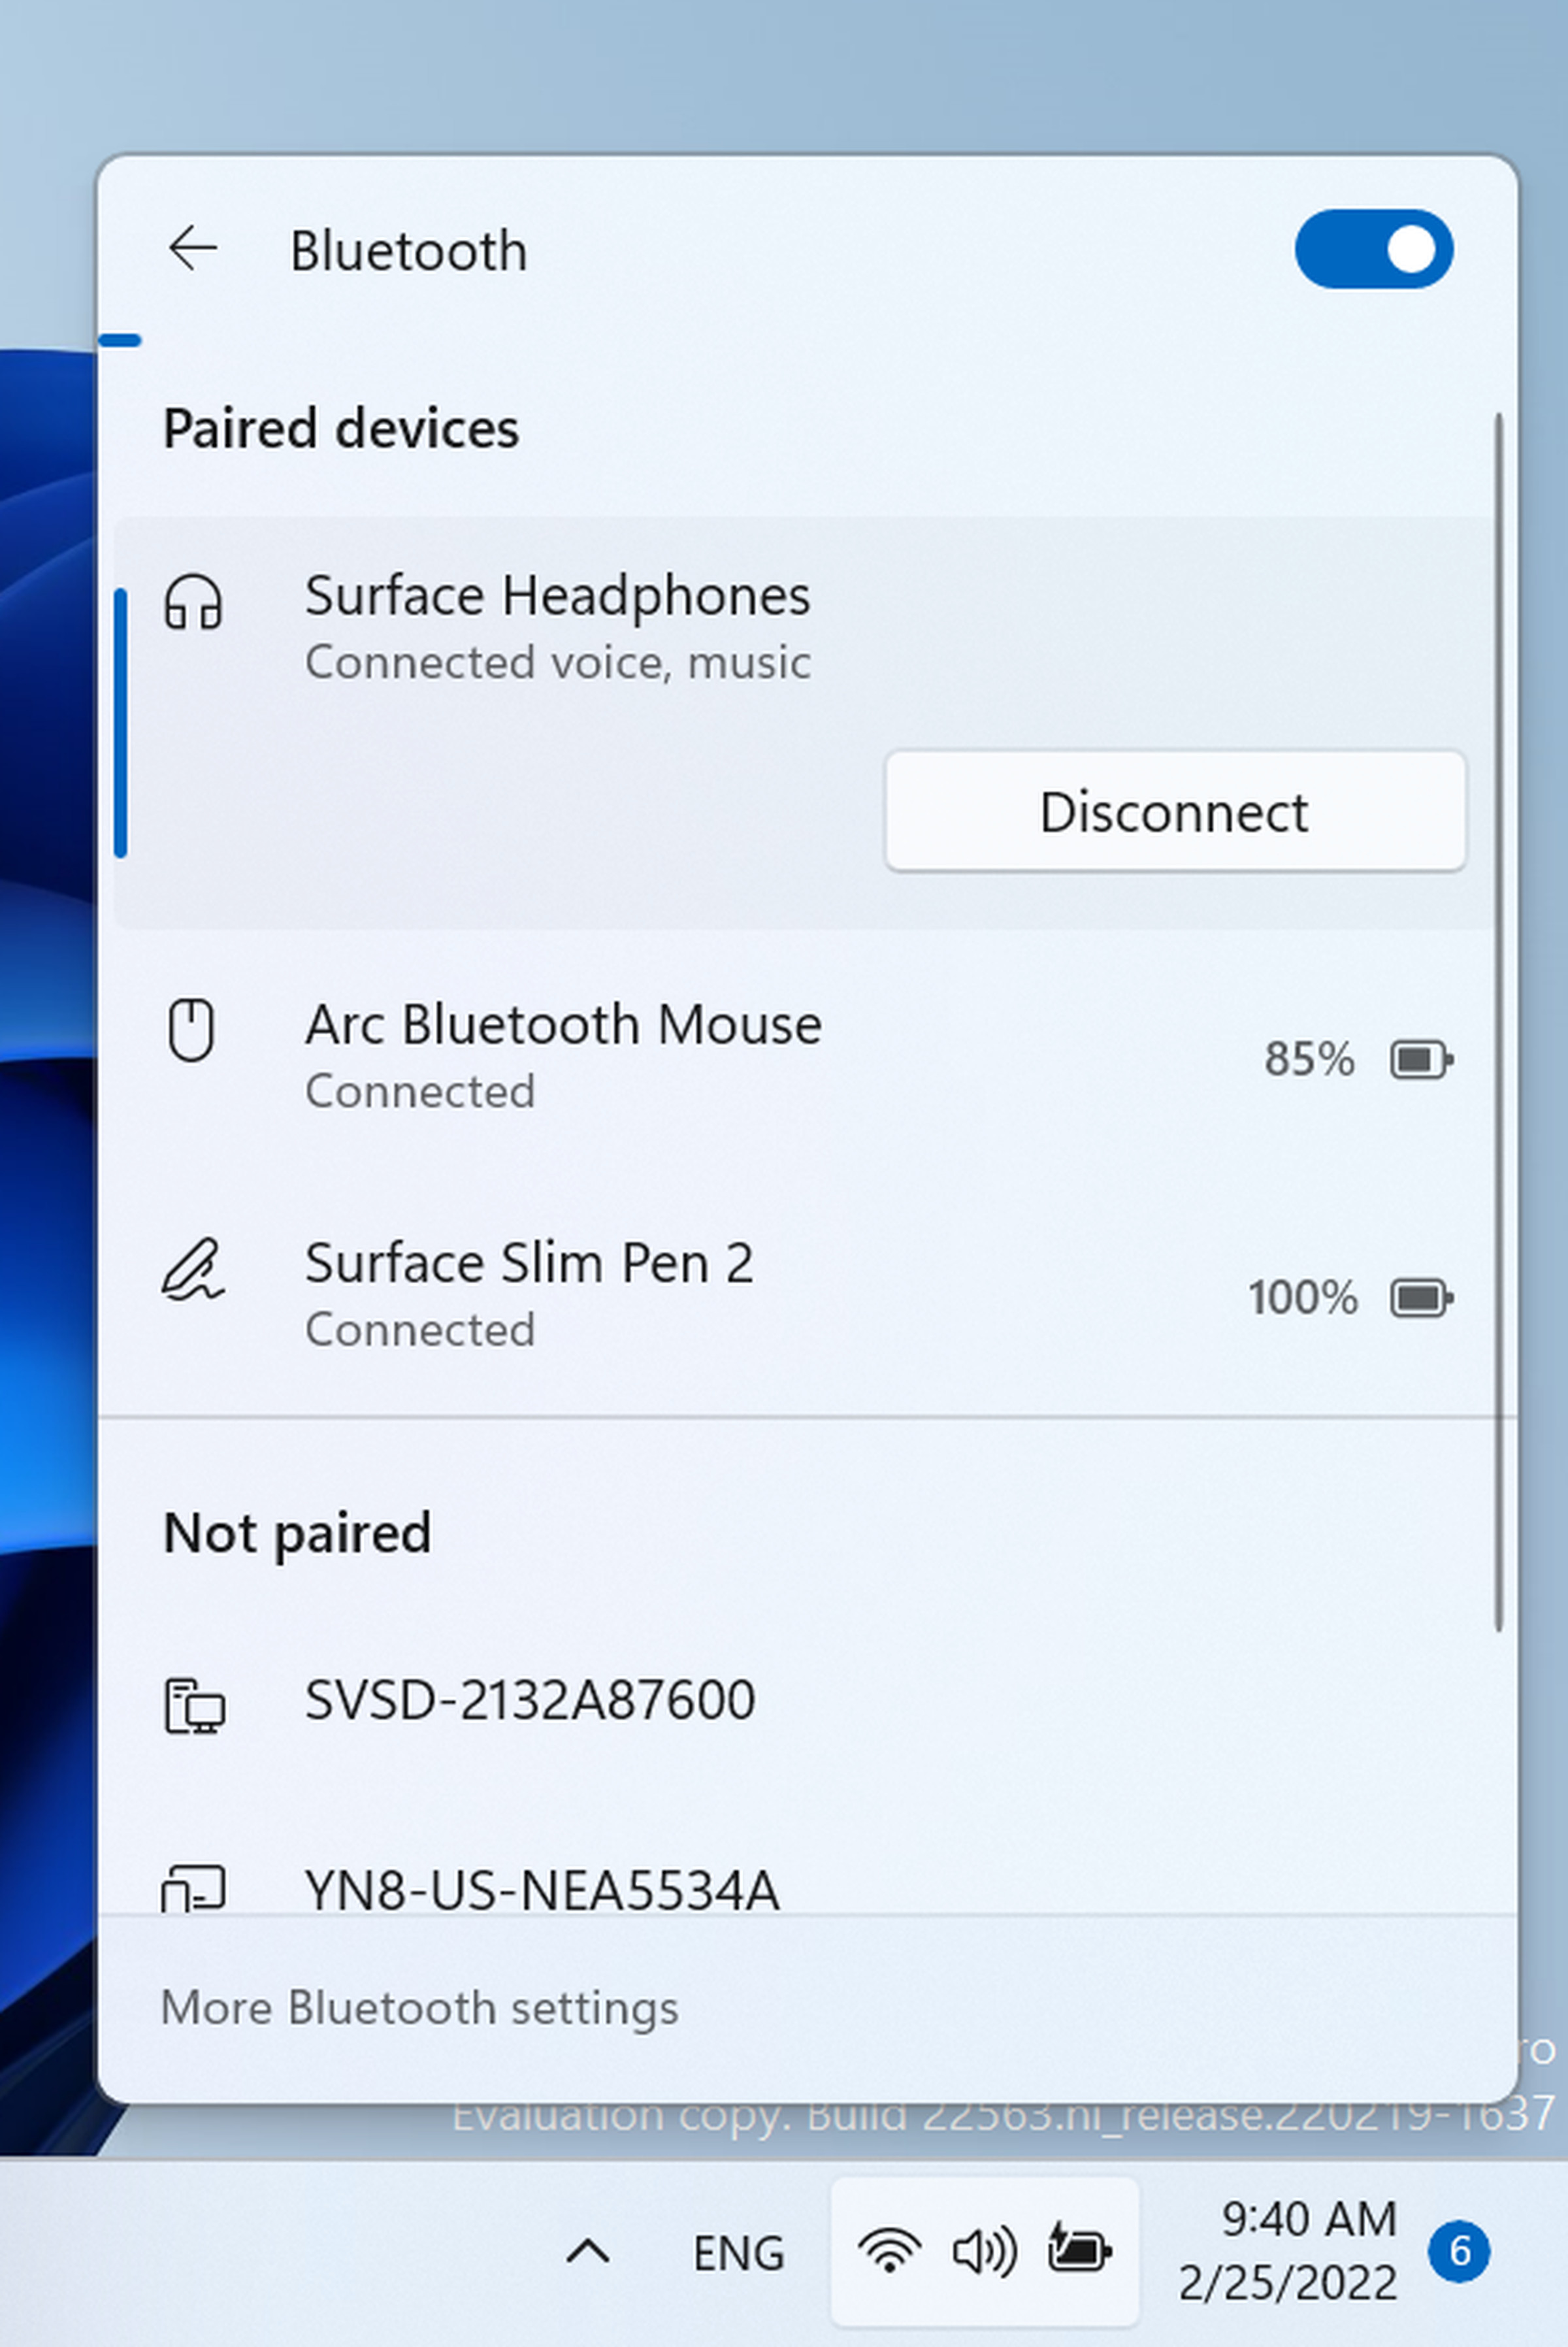 The new Quick Settings lists out Bluetooth devices, with direct access to connect and disconnect.